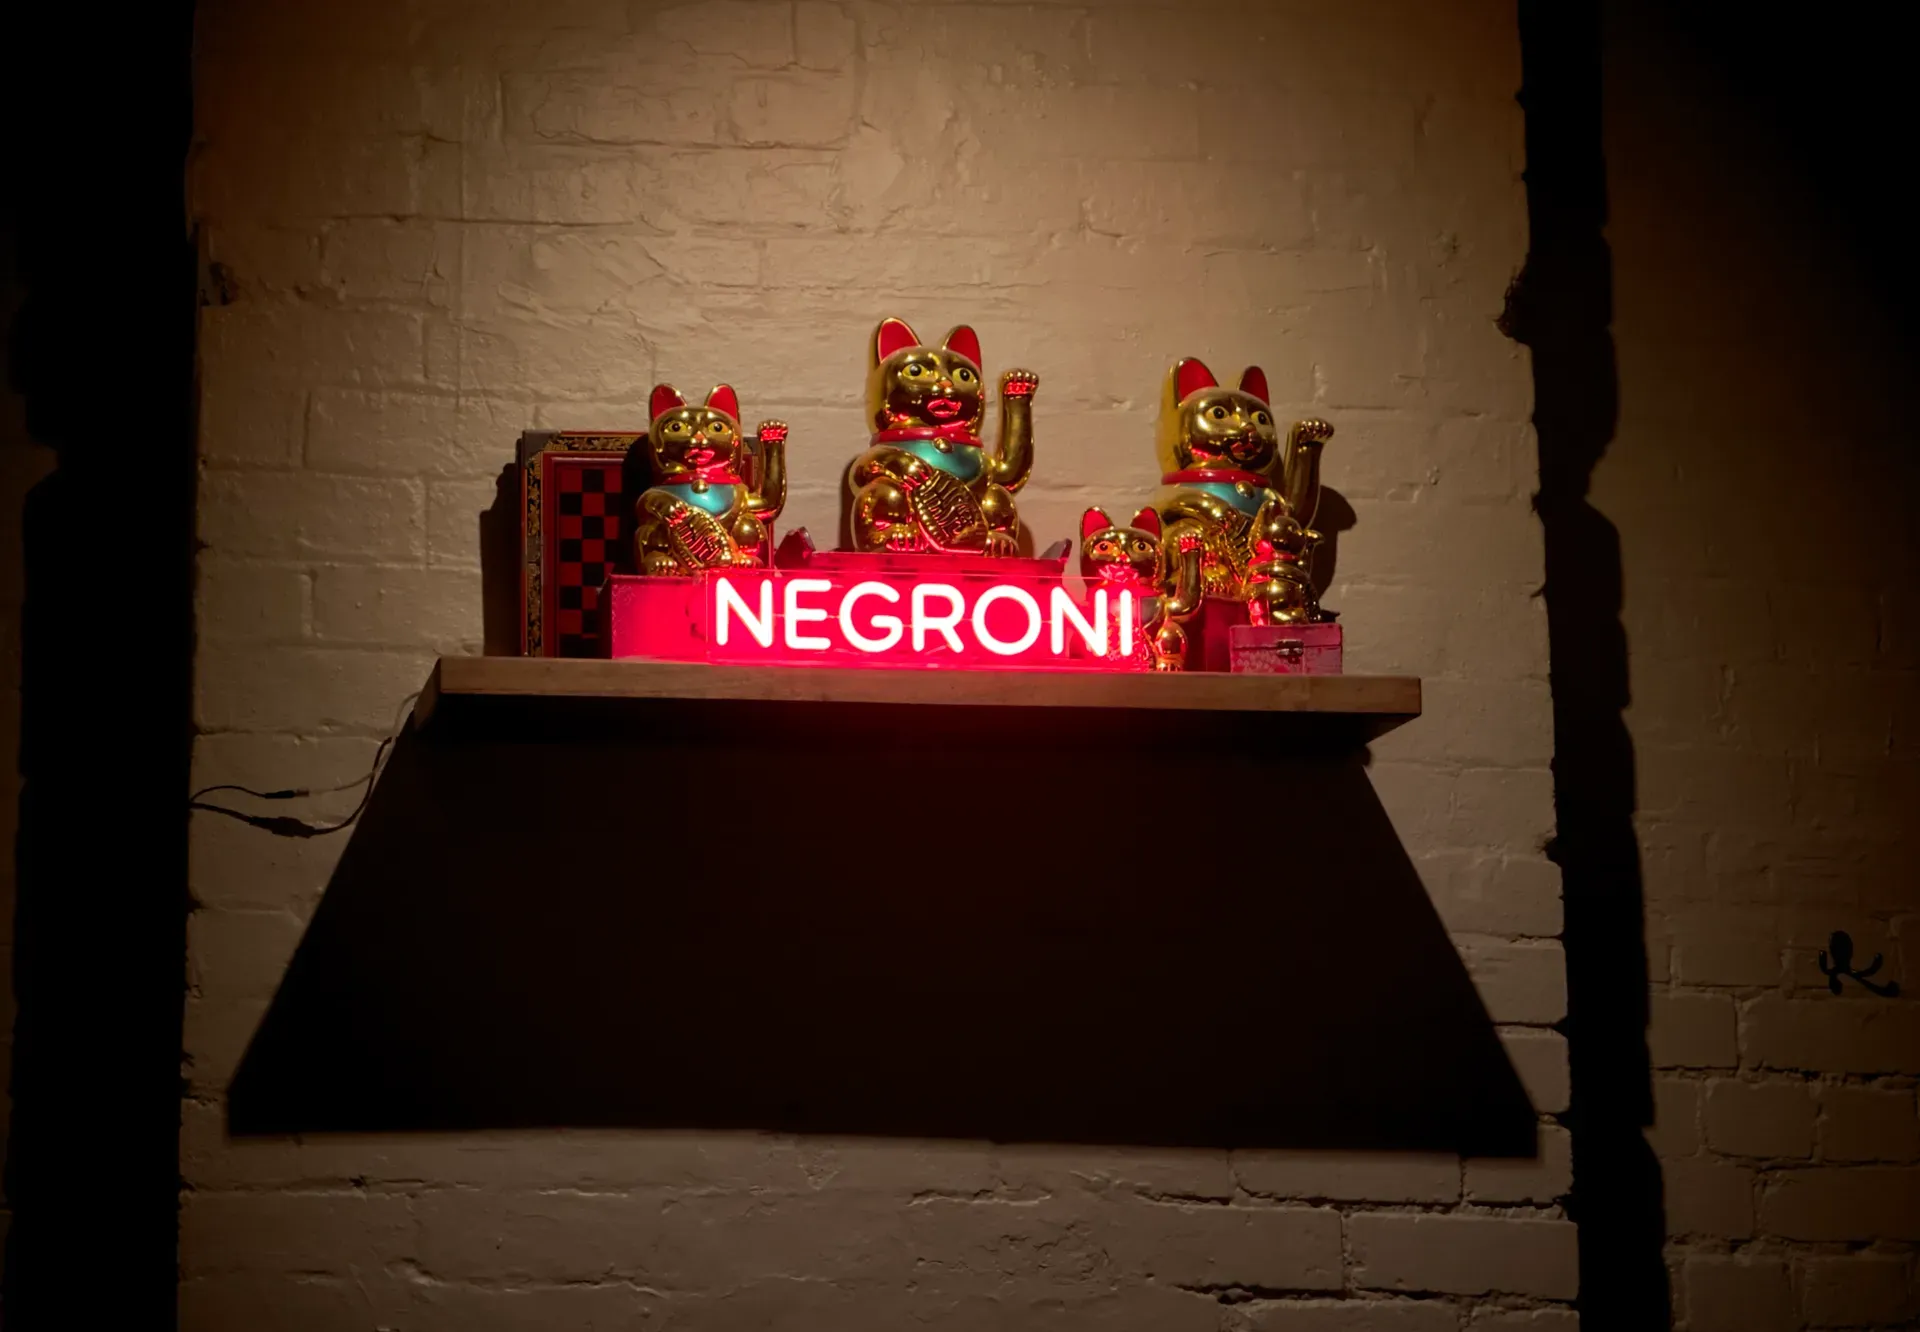 Negroni cat decorations at a bar in Melbourne